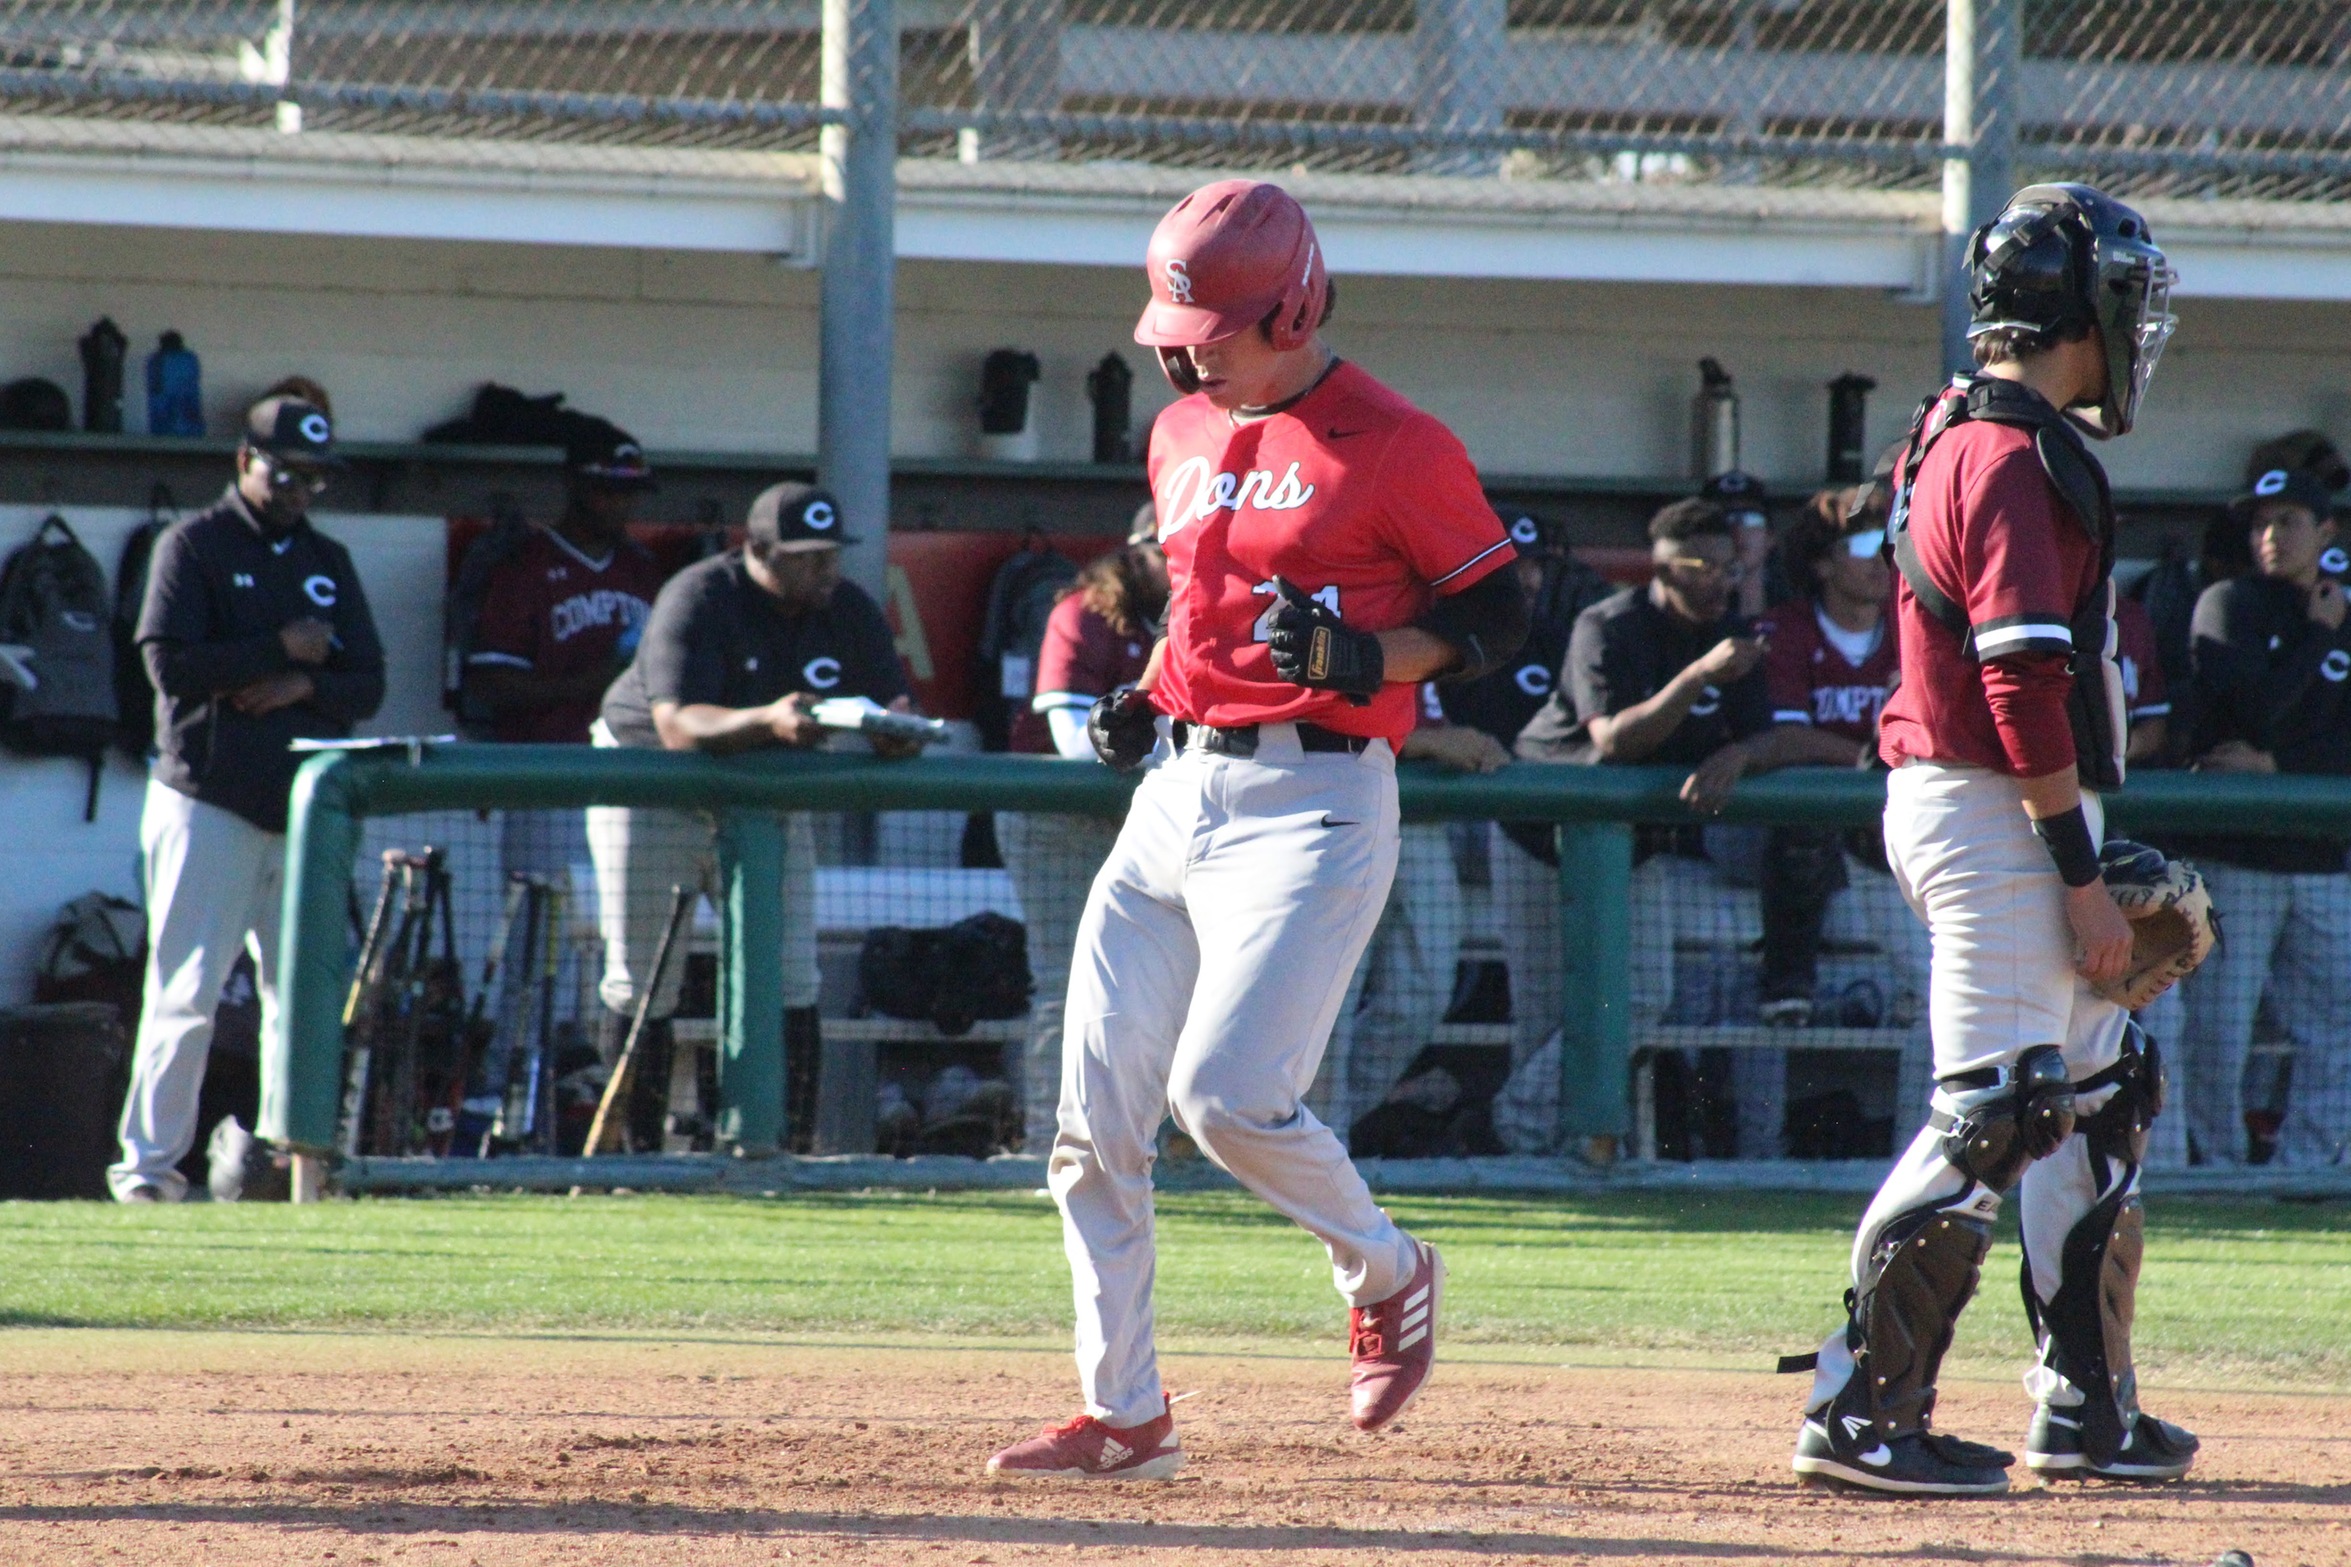 Dons Fall in 15 Innings, Bounce Back with 13-0 Route Against Cerritos